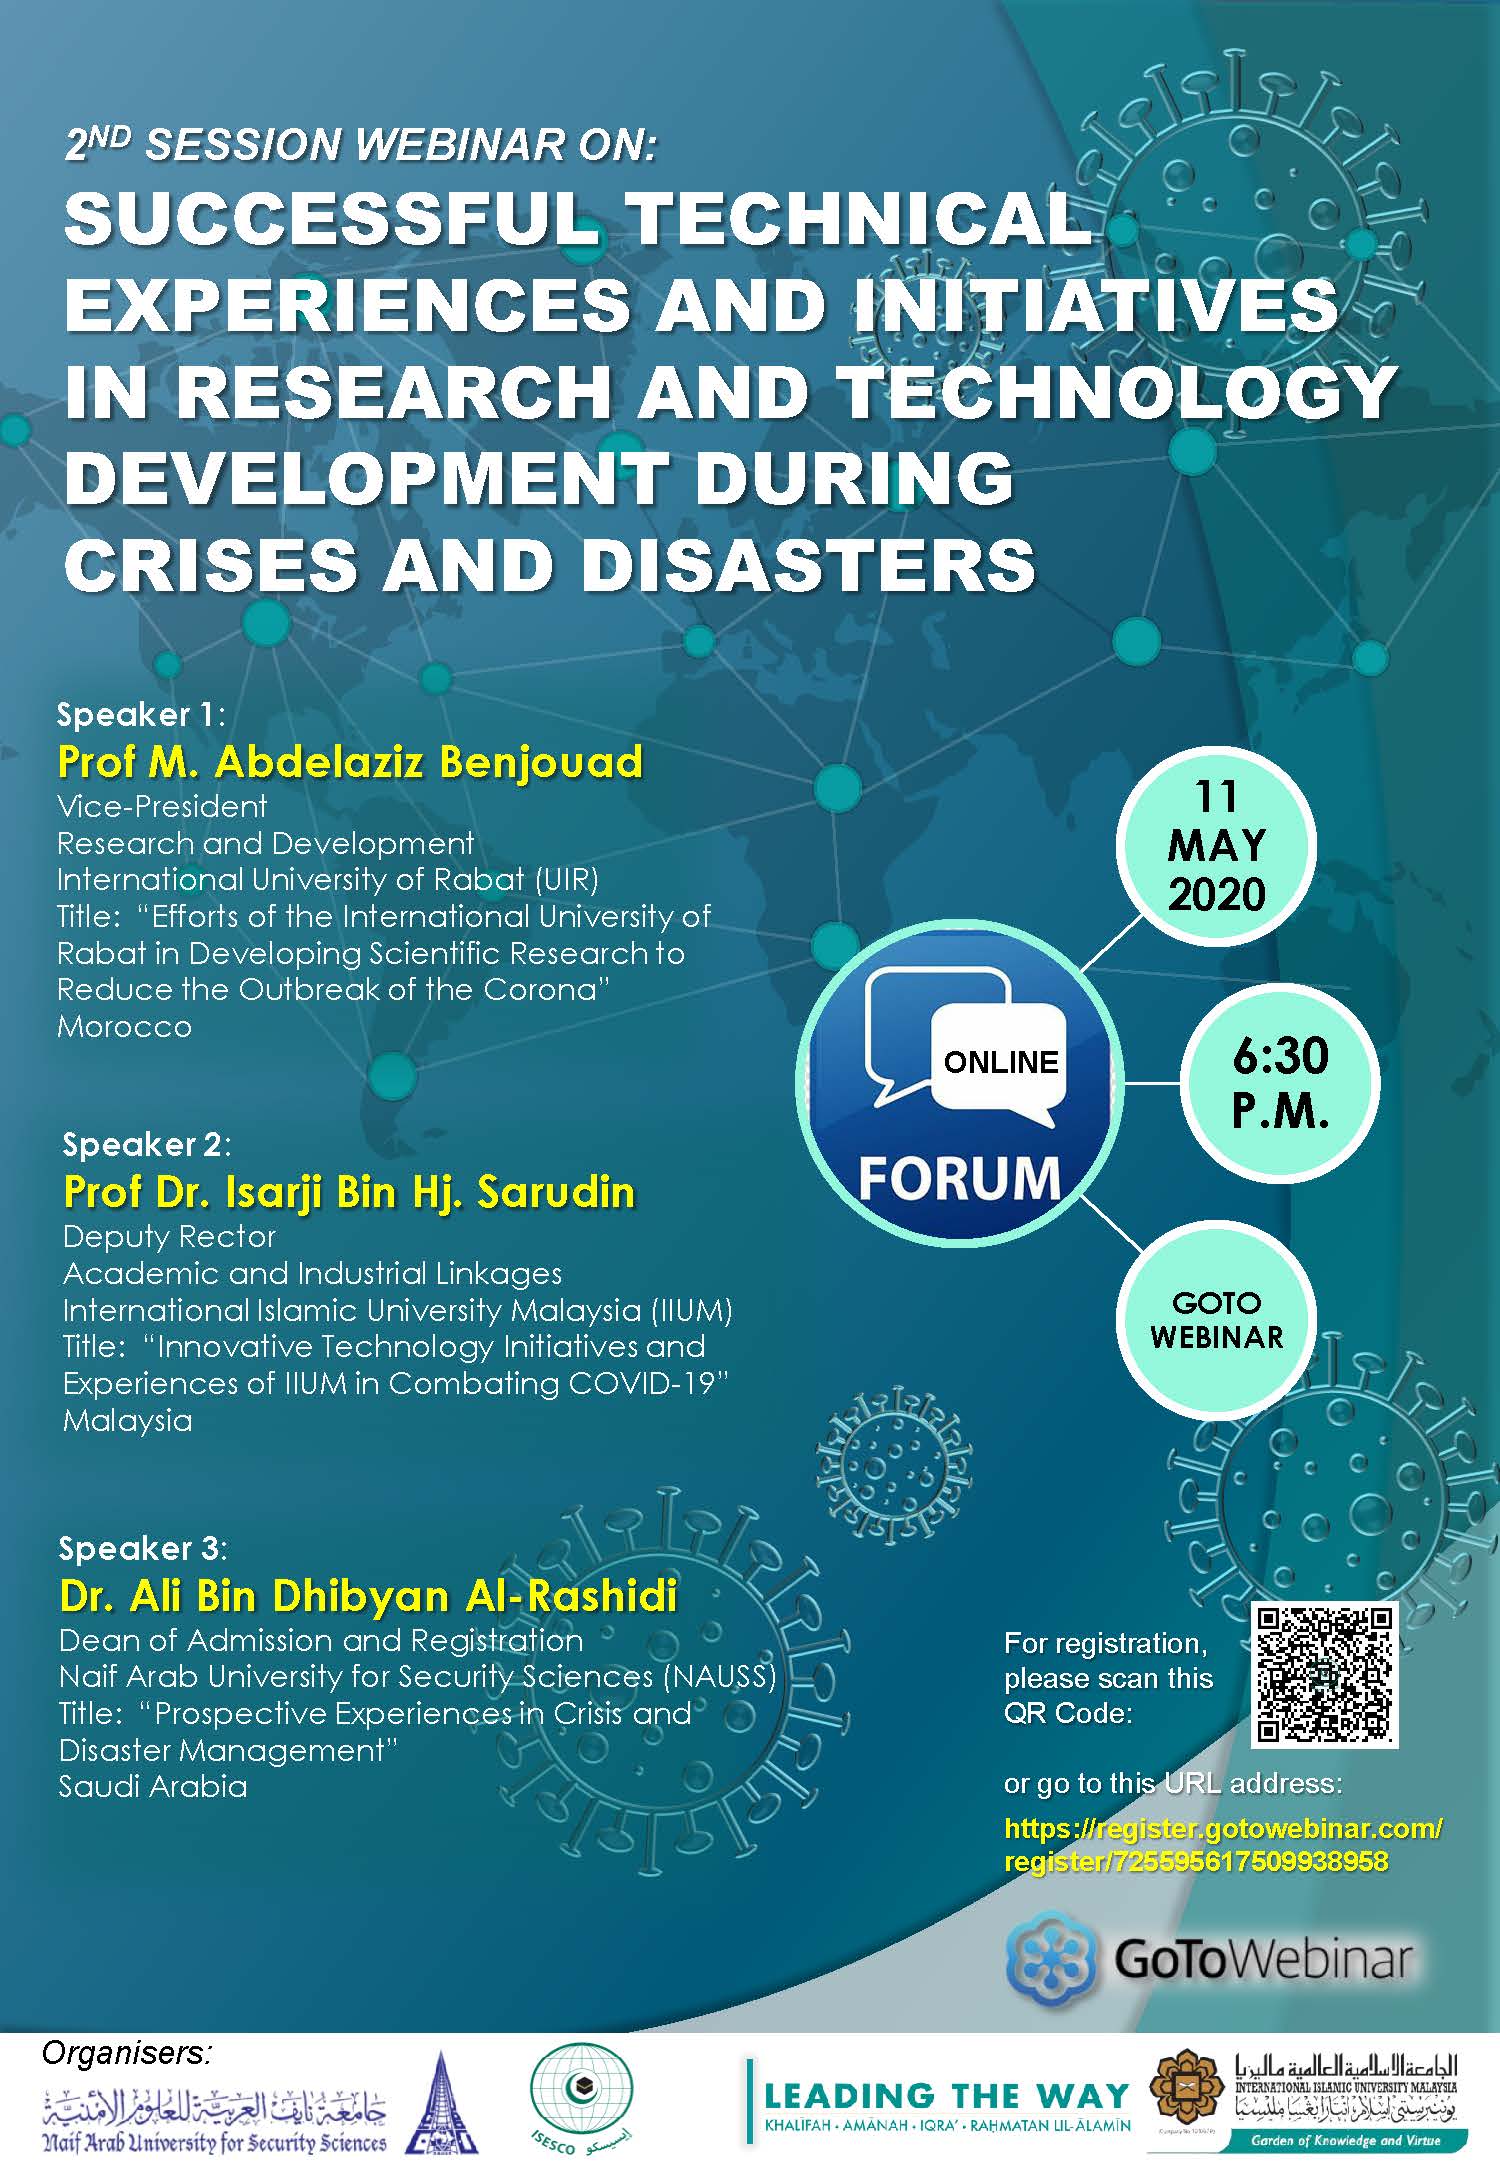 2ND SESSION WEBINAR ON: SUCCESSFUL TECHNICAL EXPERIENCES AND INITIATIVES IN RESEARCH AND TECHNOLOGY DEVELOPMENT DURING CRISES AND DISASTER